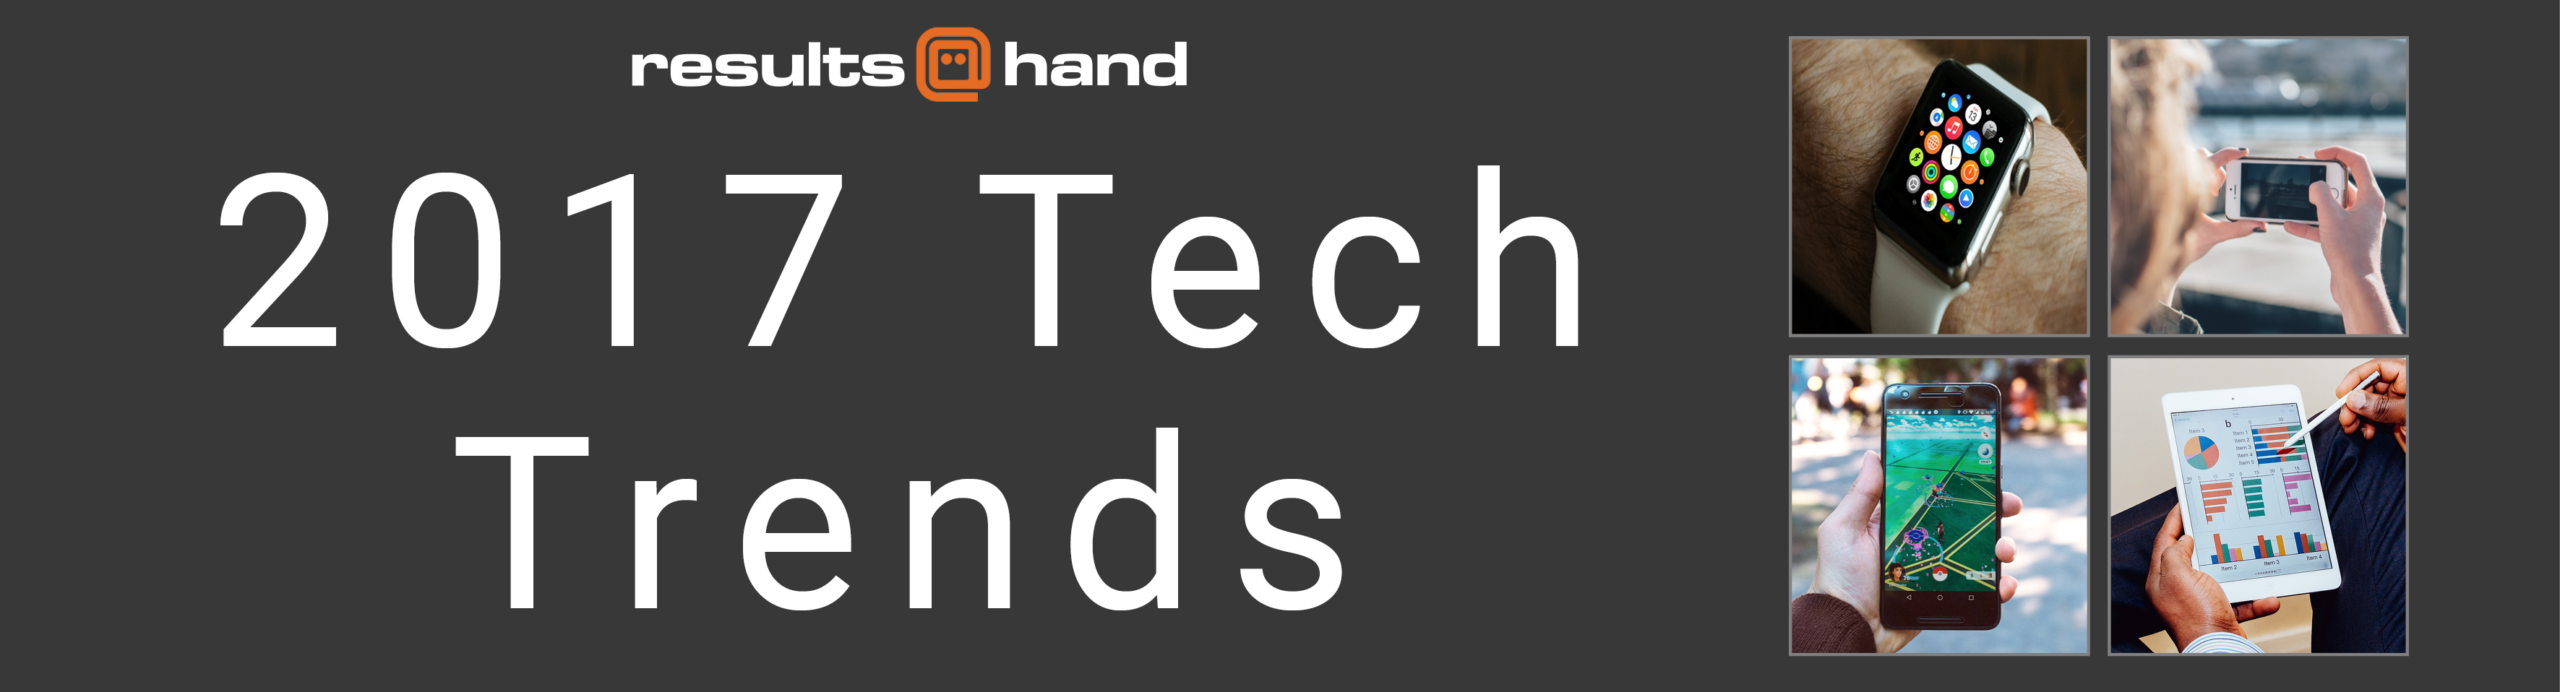 2017 Tech Trends Infographic by Results@Hand banner